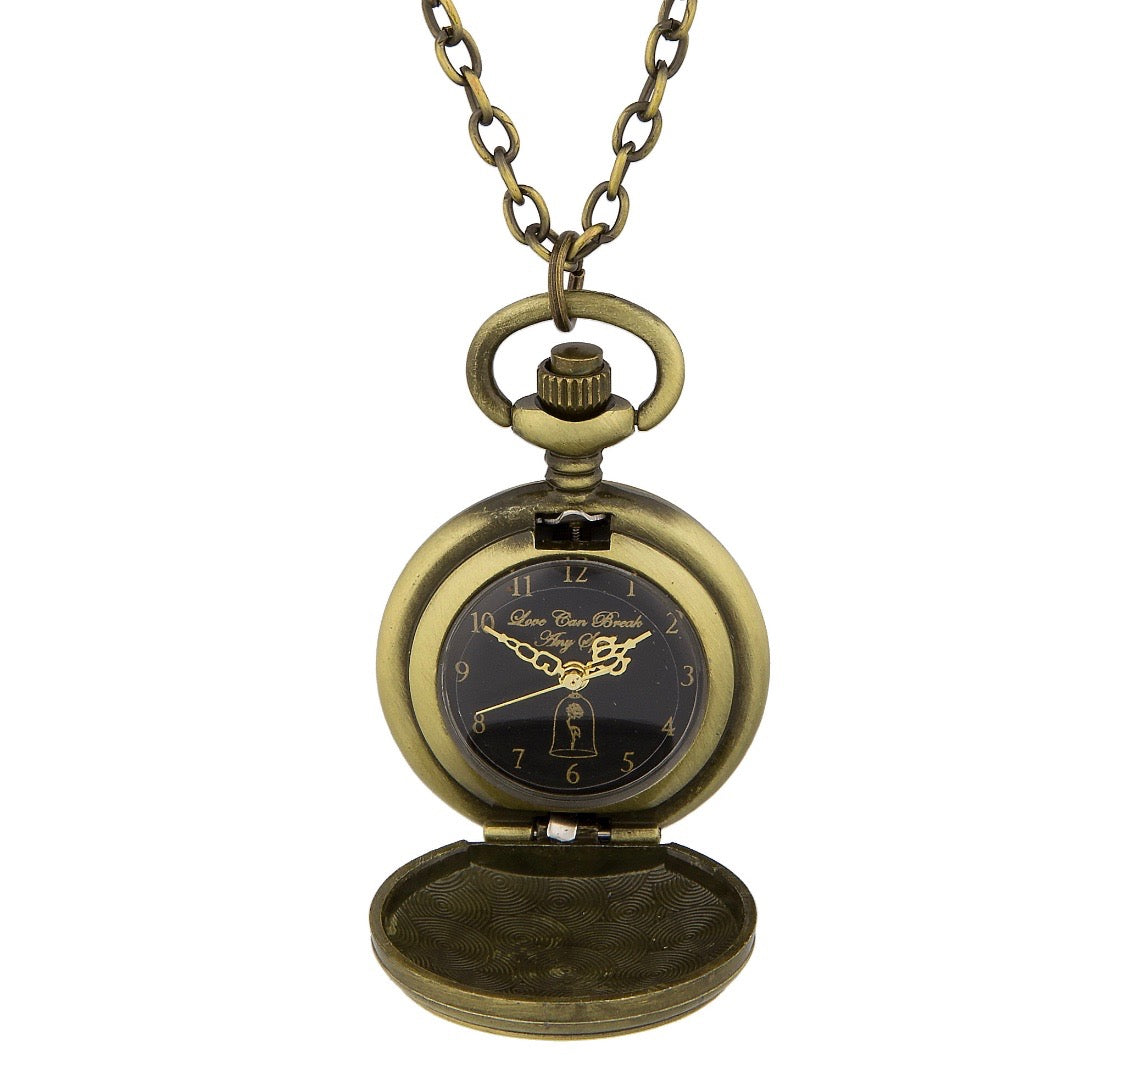 Disney Parks Beauty & the Beast Pocket Watch Necklace New with Tag